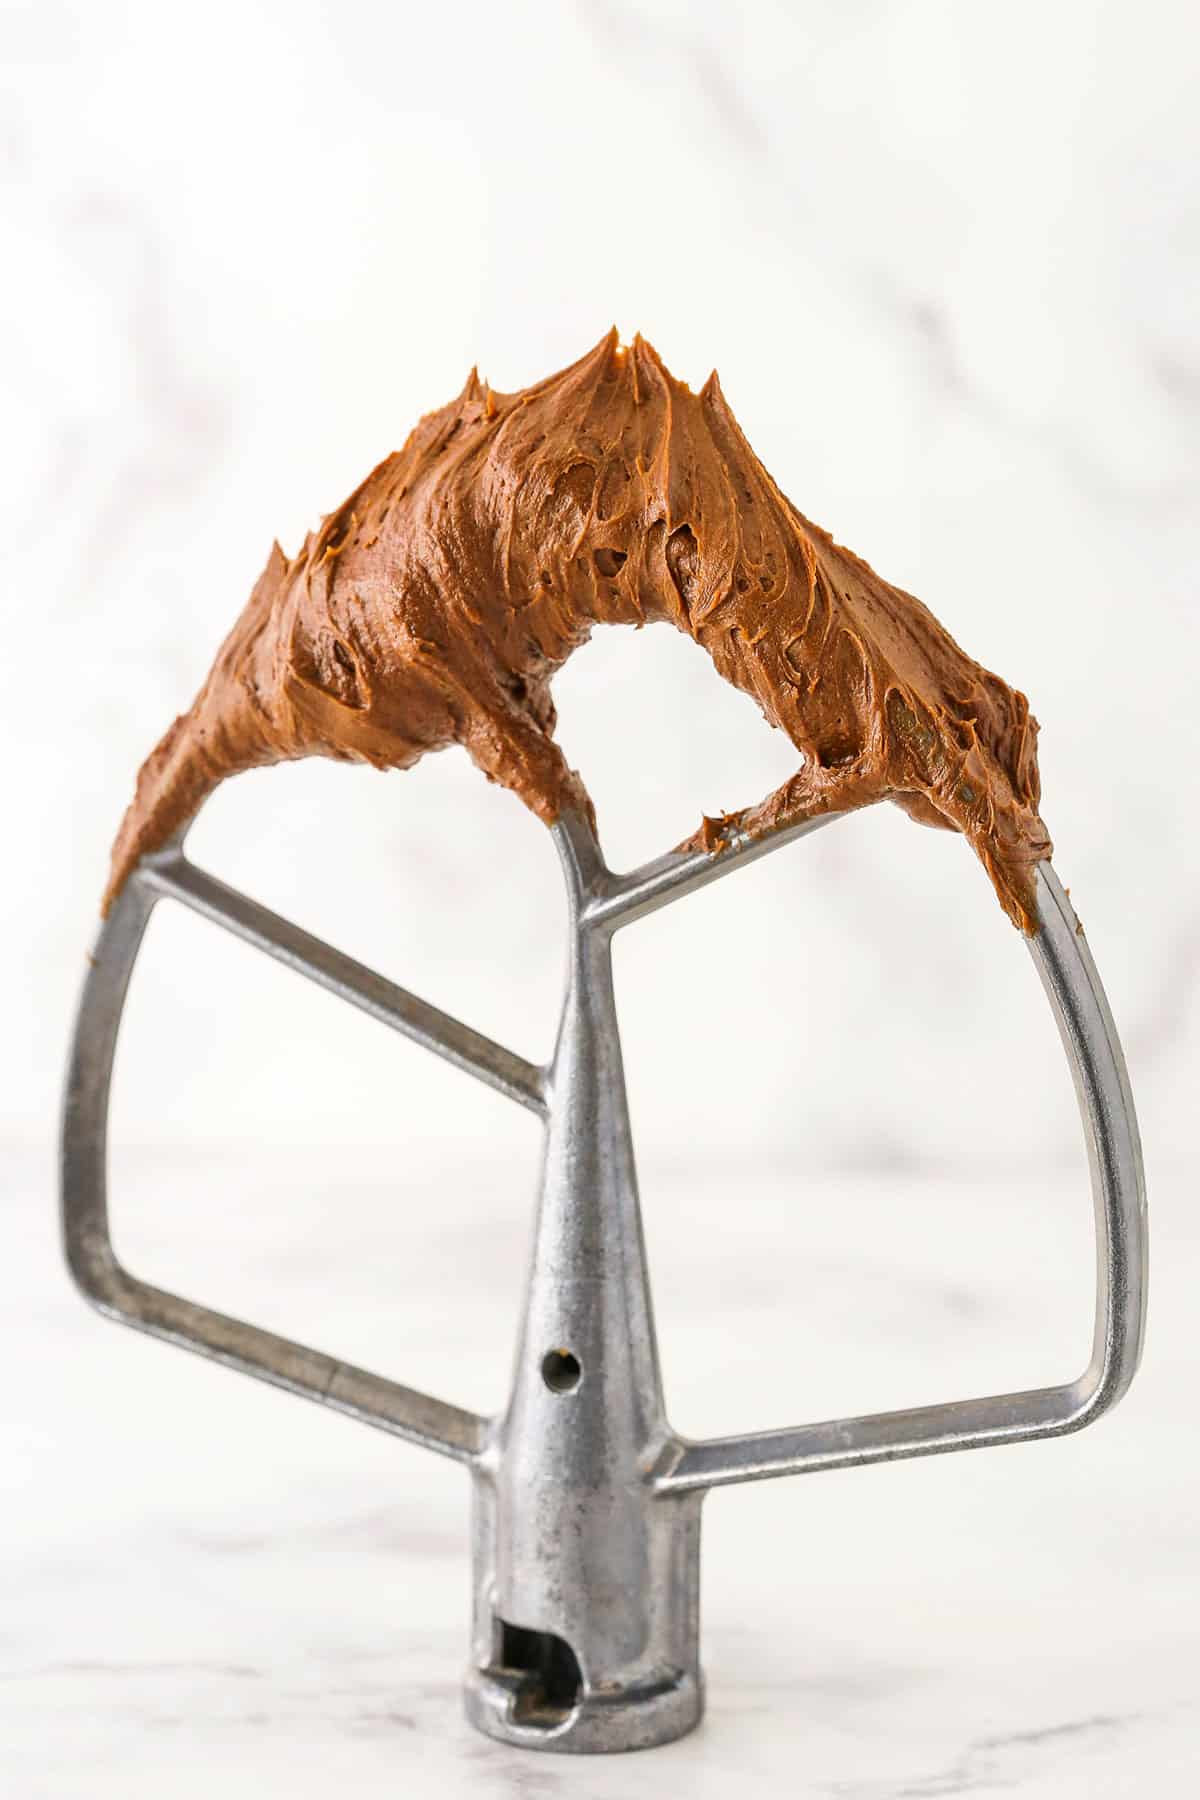 Chocolate Buttercream Frosting on a mixer blade